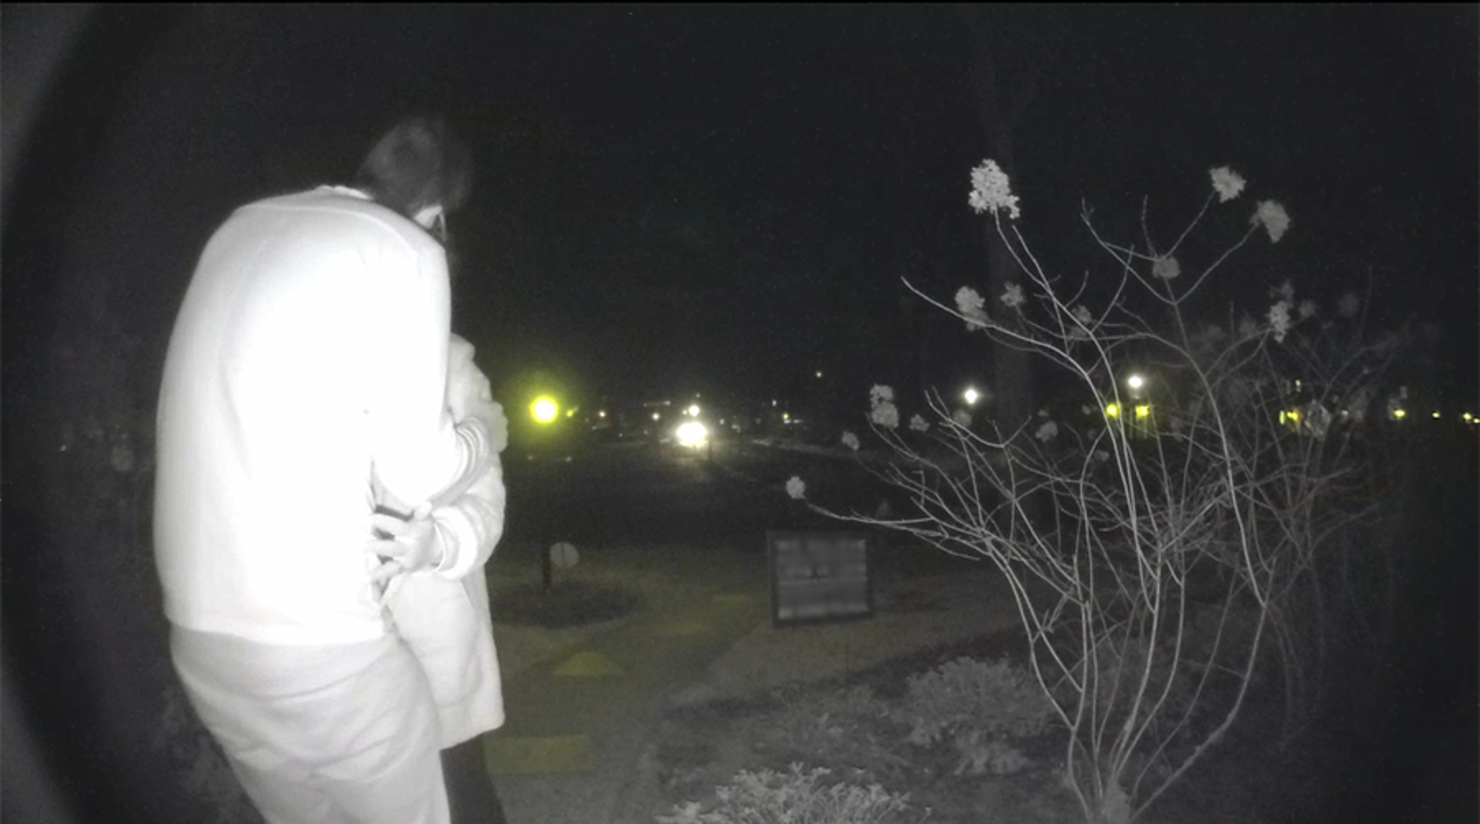 Ring doorbell camera catches man peering into home at night over